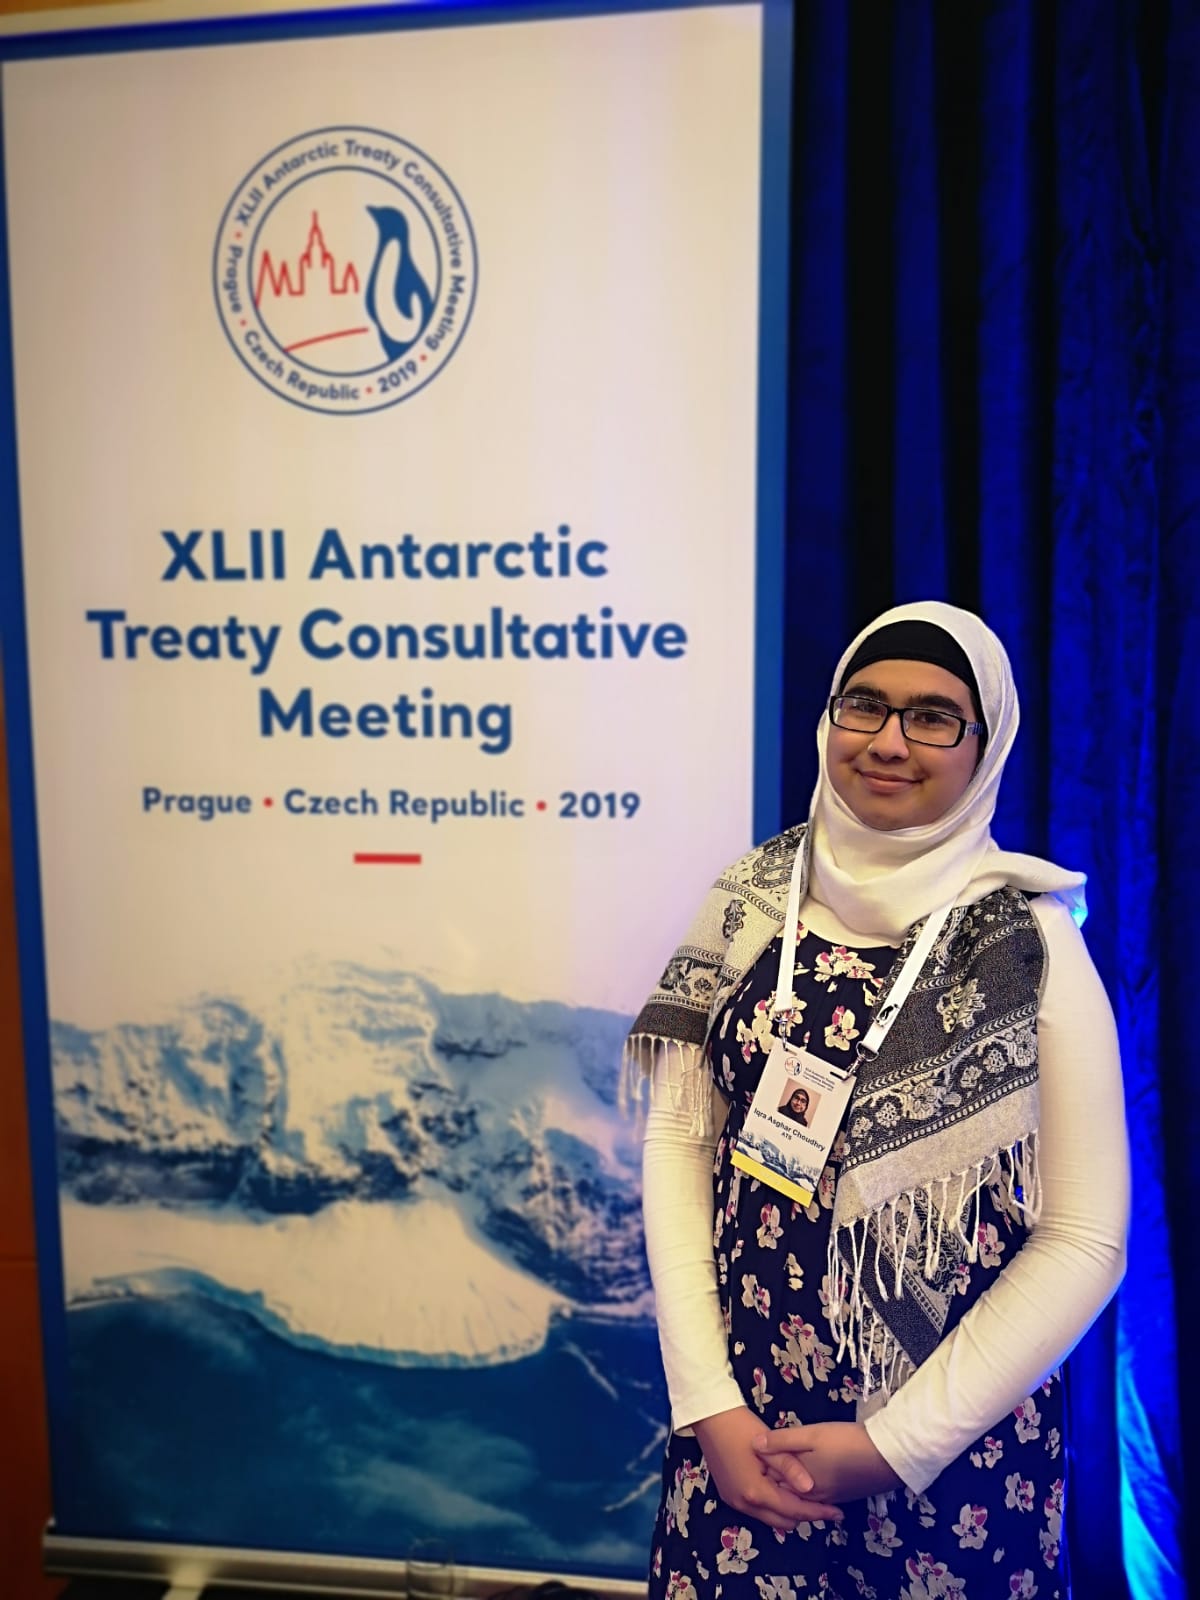 Dr. Iqra Choudhry stands beside a banner that reads 'XLII Antarctic Treaty Consultative Meeting, Prague, Czech Republic, 2019'.